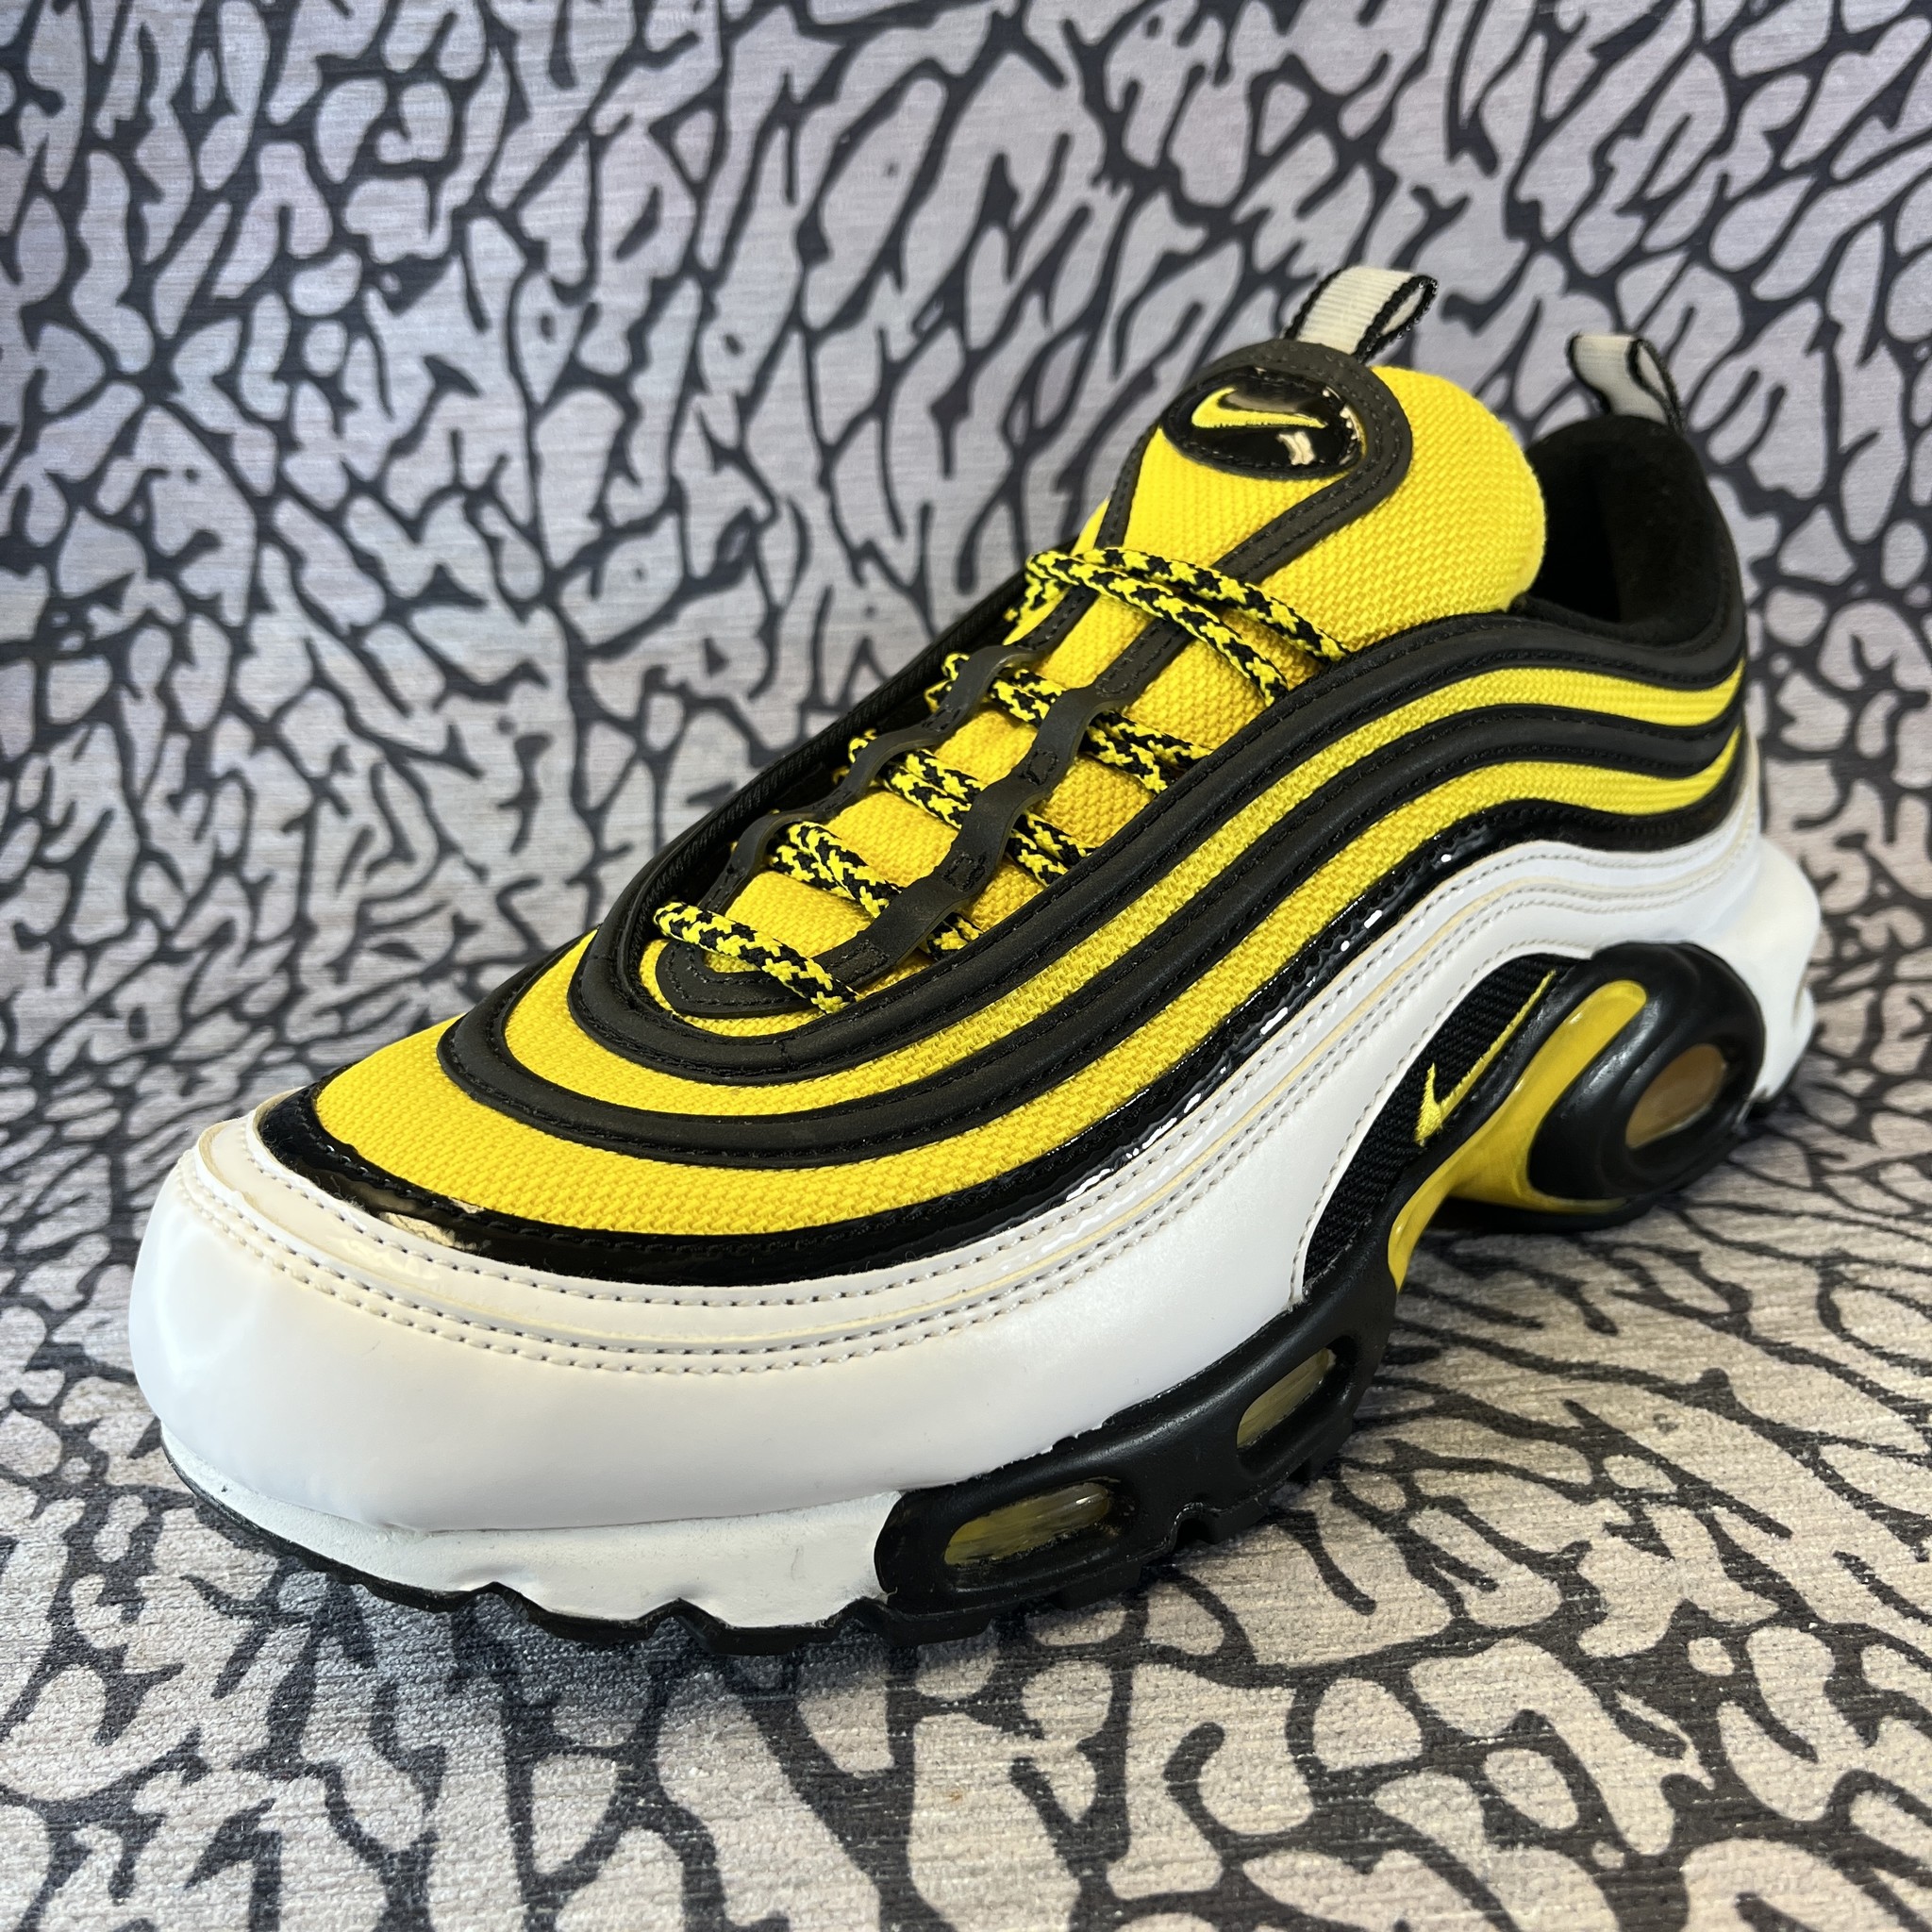 Air Max Plus 97 'Frequency Pack'